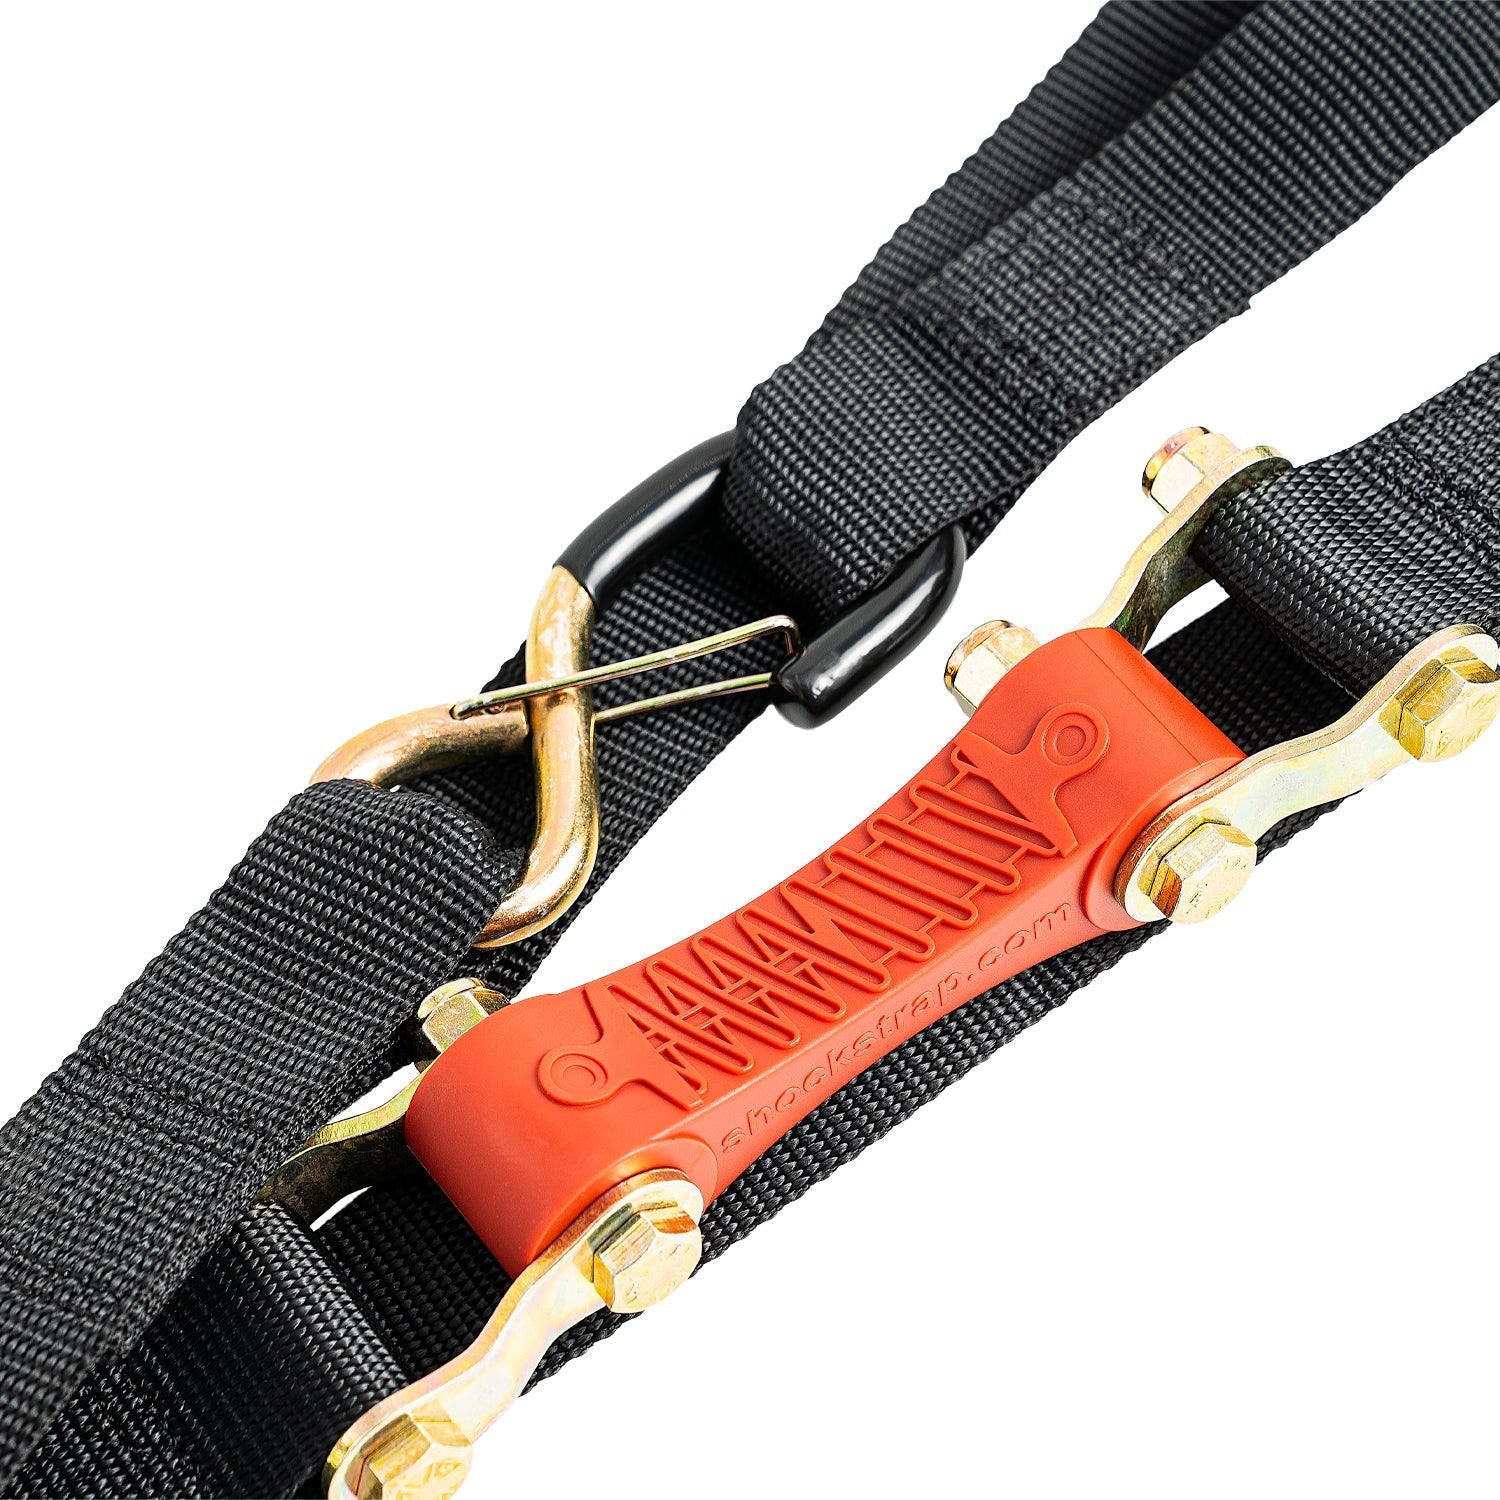 15ft x 1.5in ShockStrap Ratchet Strap, 1k WLL, - Wholesale - The Perfect Bungee & ShockStrap Tie Downs